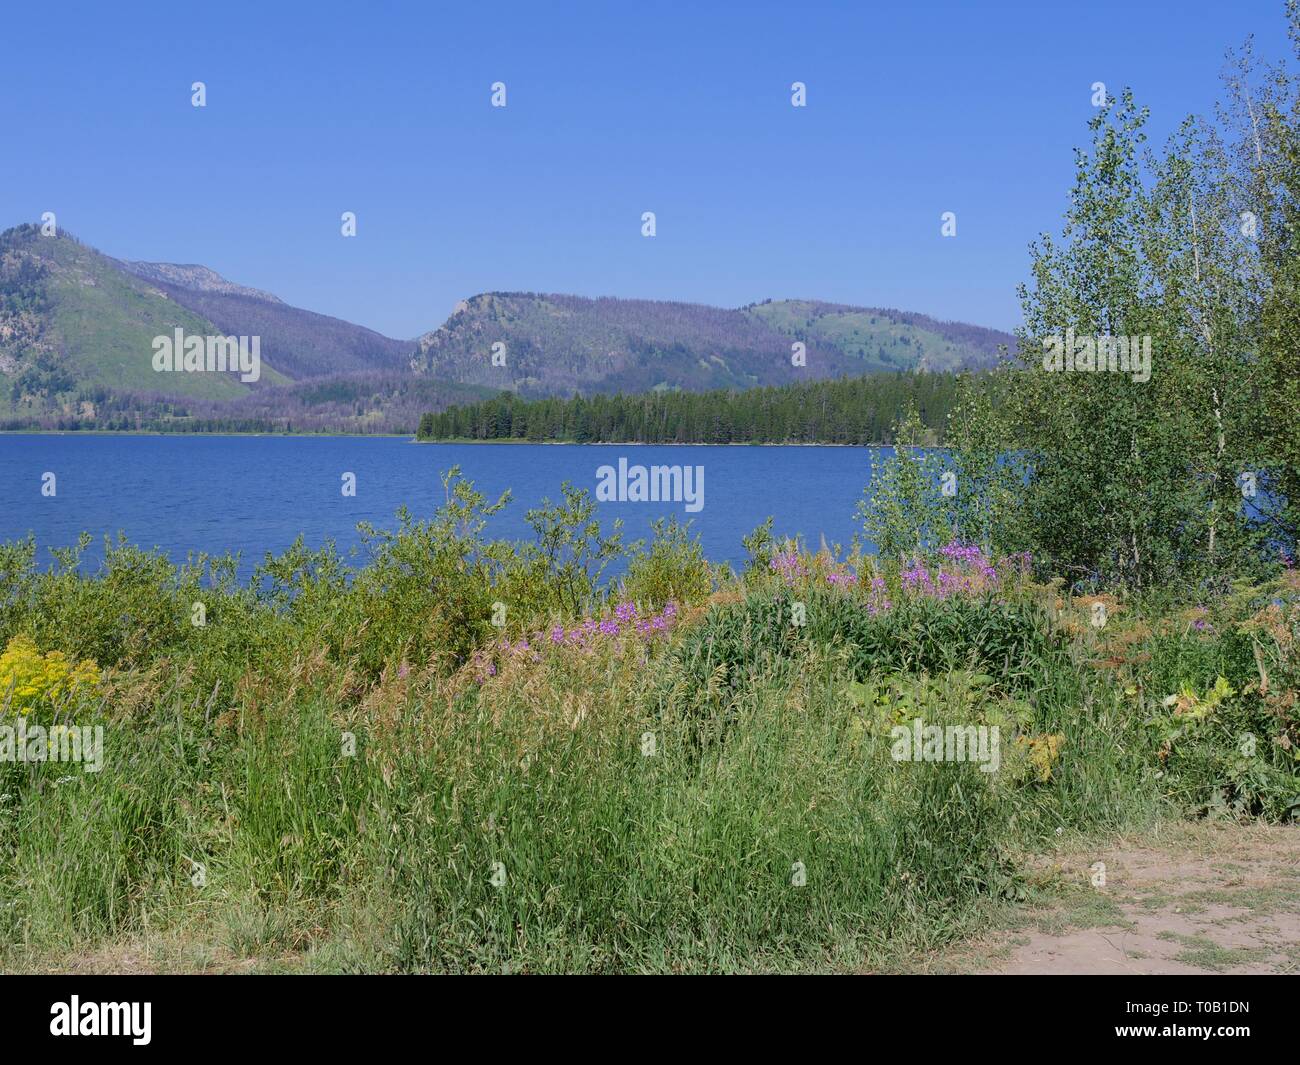 Wide scenic shot of Jackson Lake with greenery and flowers at the Grand Teton National Park in Wyoming. Stock Photo